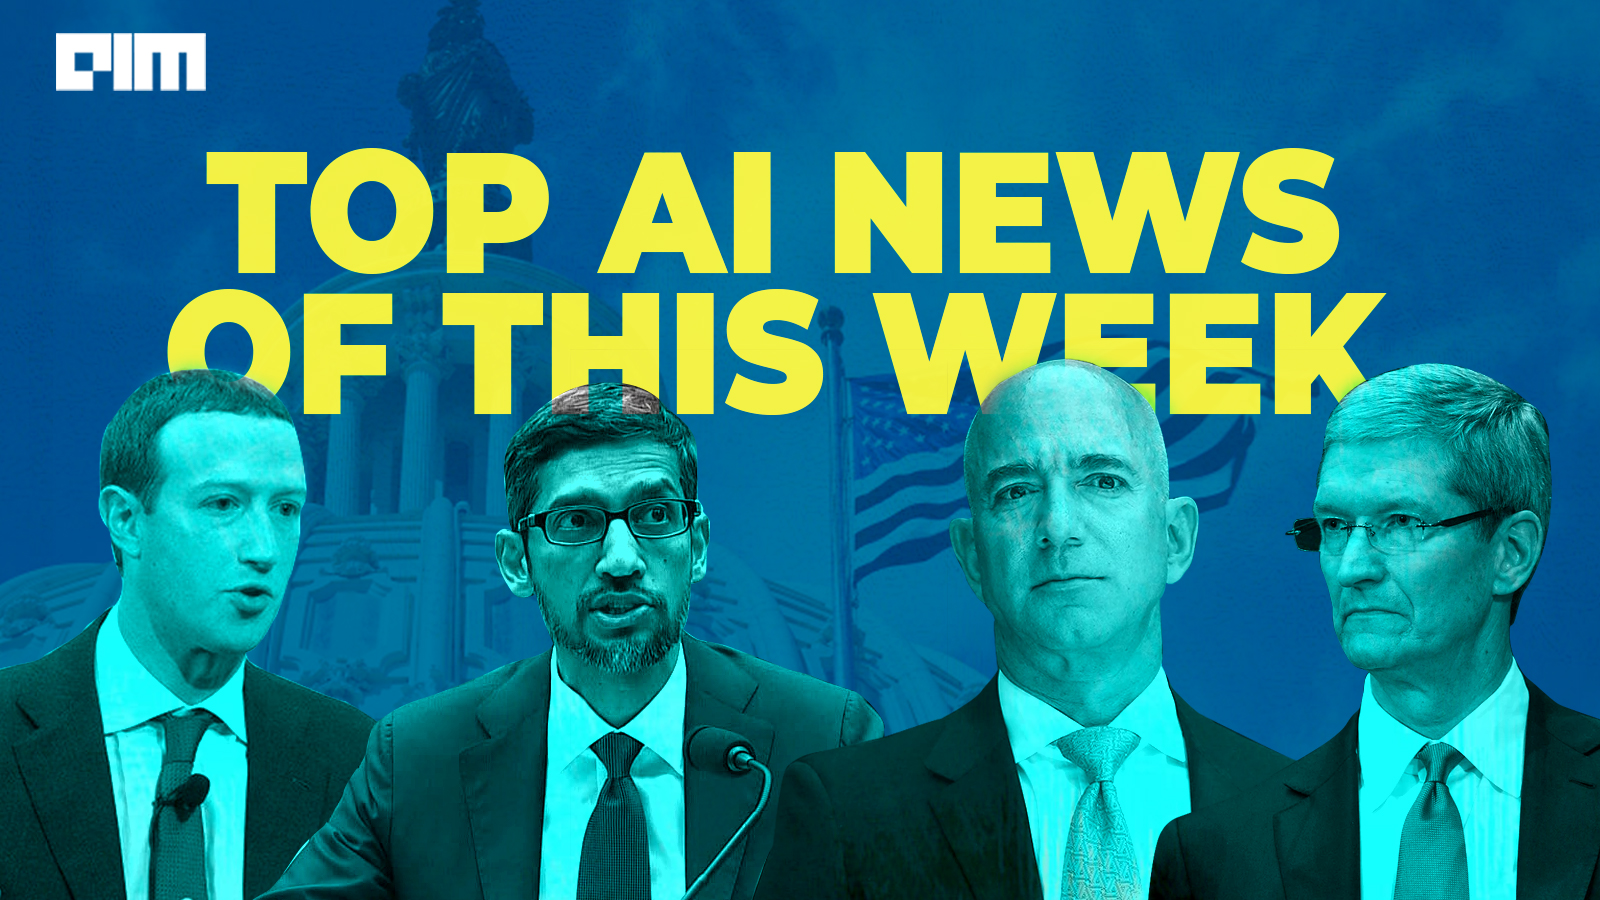 Tech Giants Grilled, Algorithms Goof-Up And More In This Week’s Top AI News